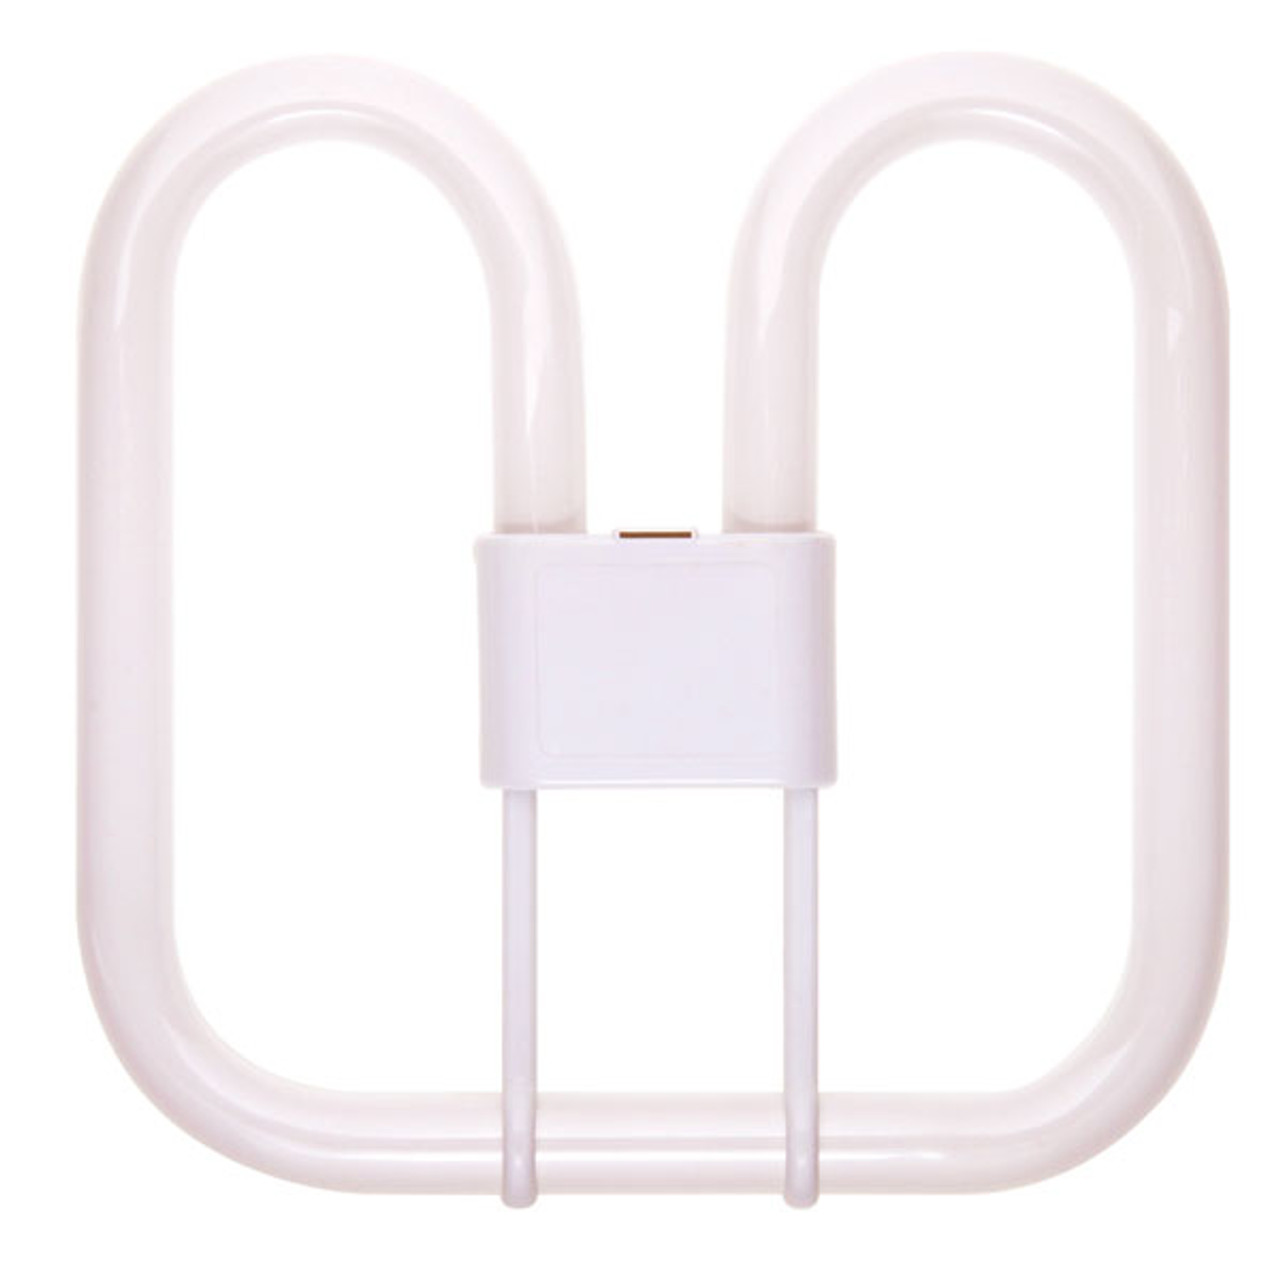 BELL Square 28W 4 Pin 840 Cool White